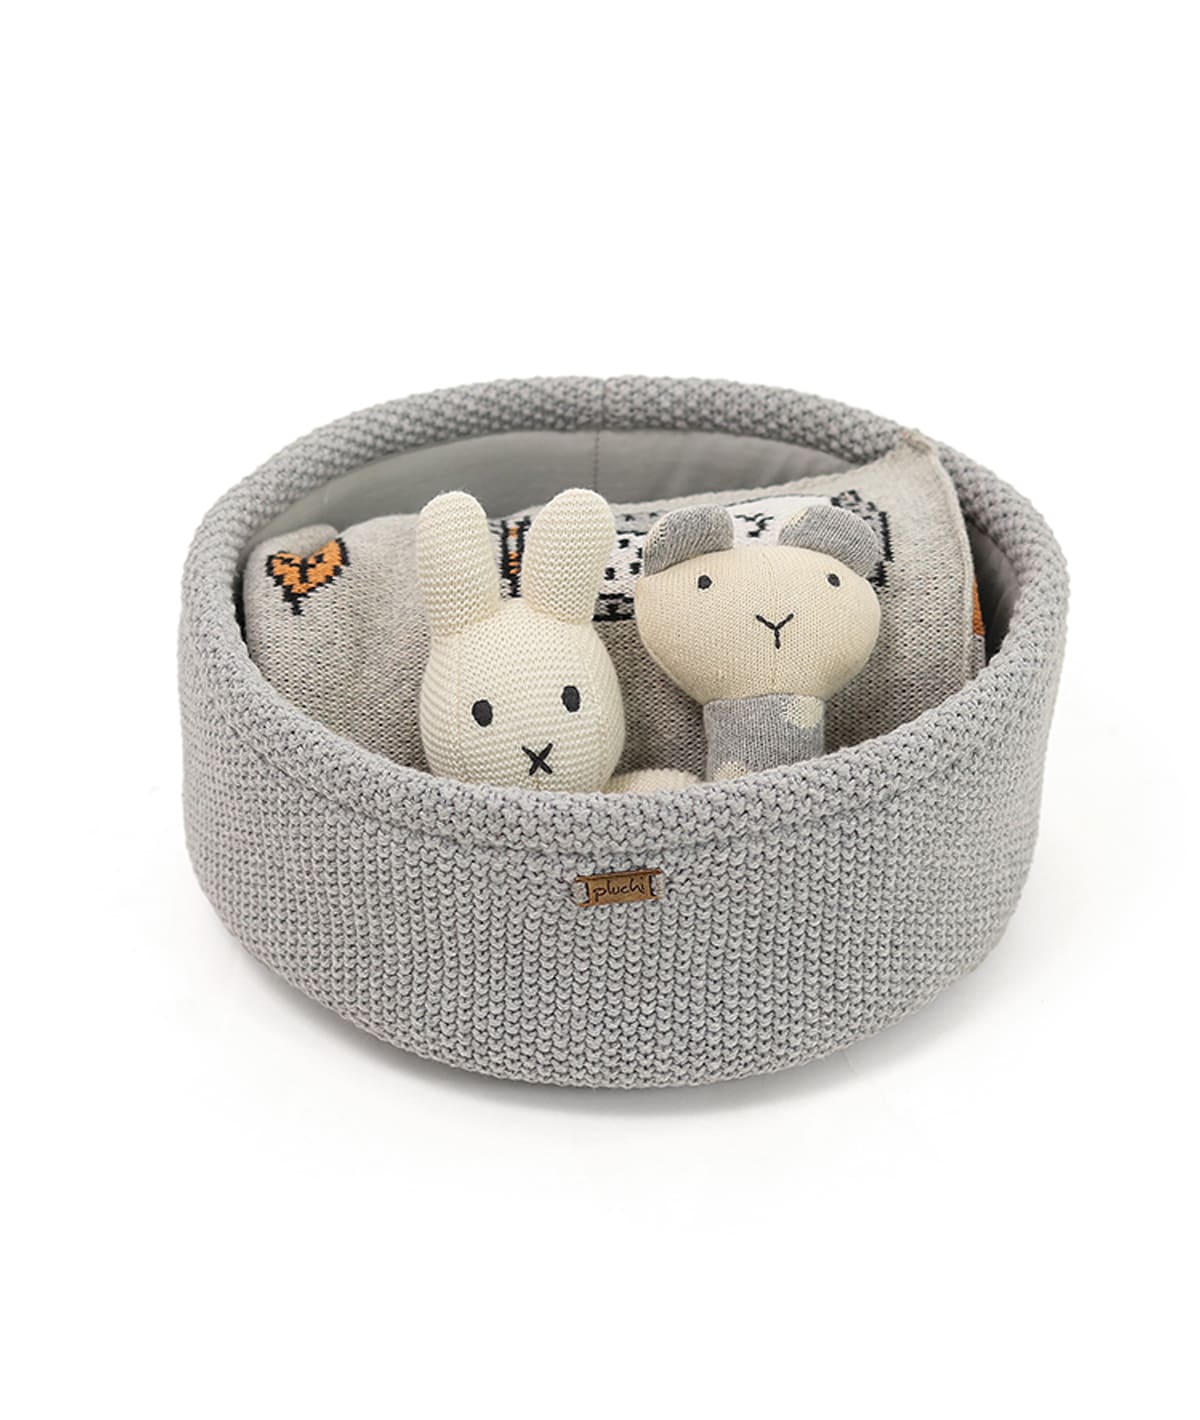 Bunny Gift Basket (Set of 4 pcs - Storage Basket, Knitted Baby Blanket, Soft Toy, and Rattle)